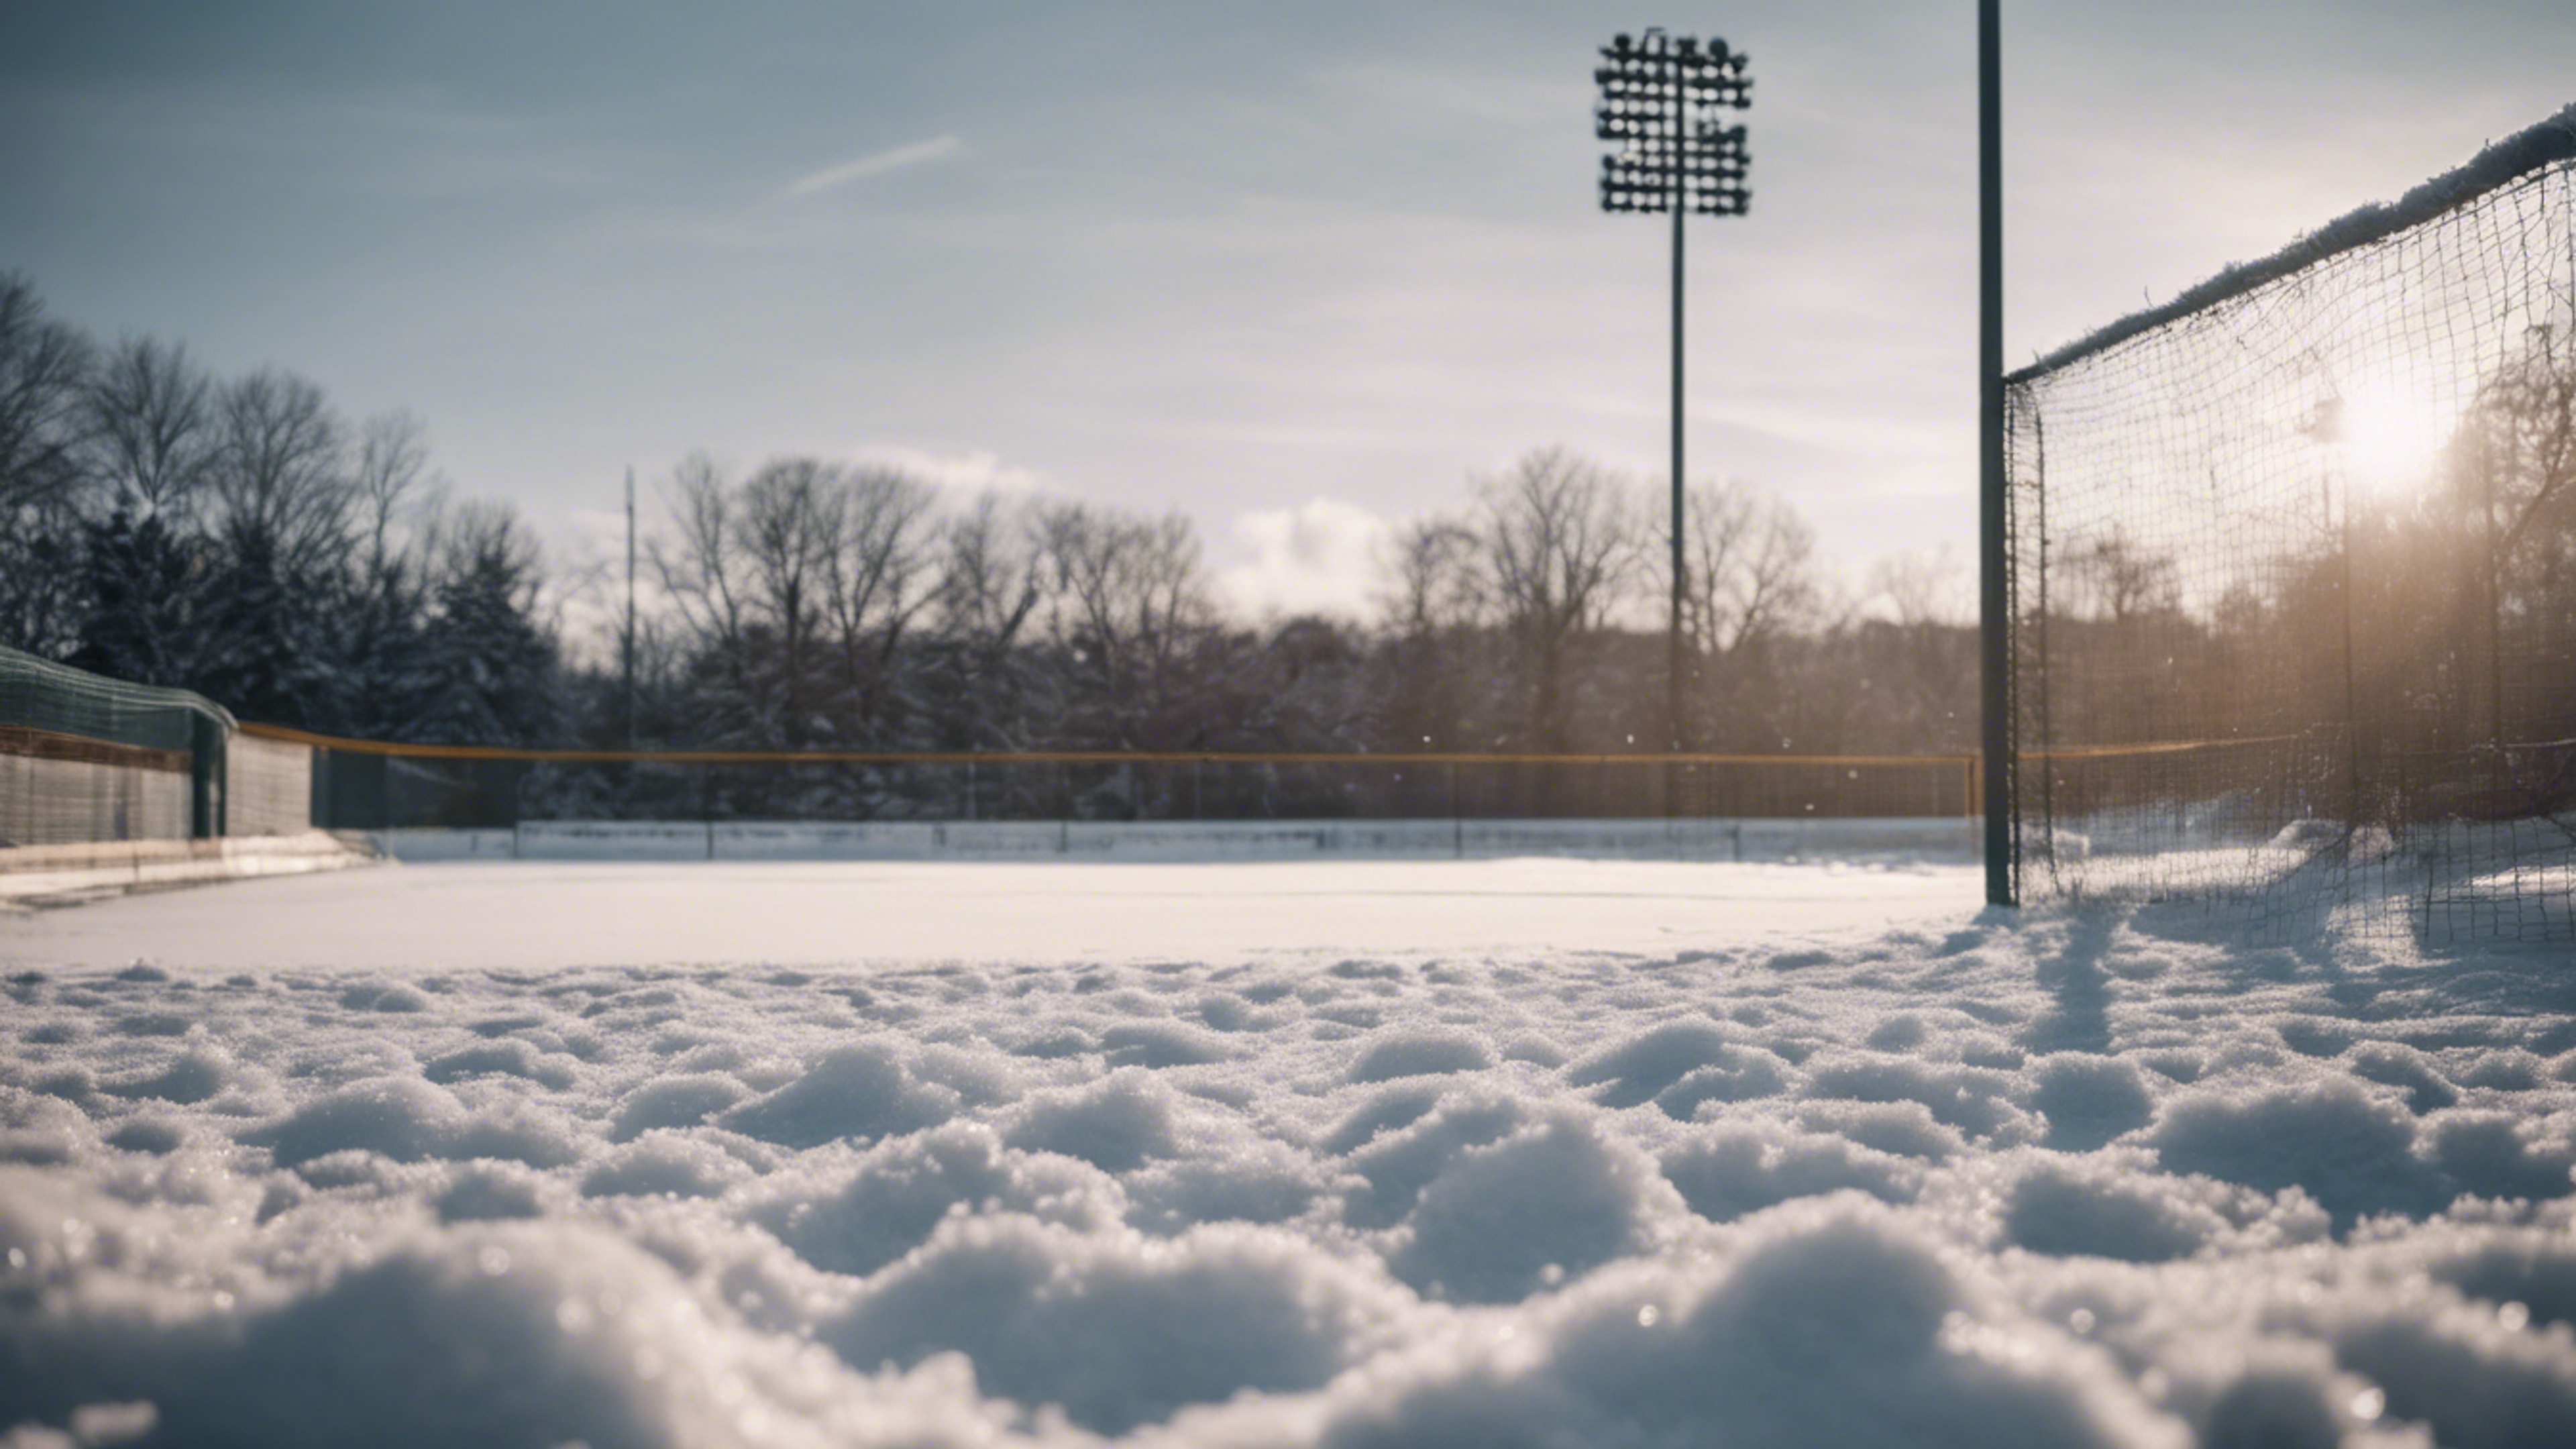 A baseball field covered in a thin layer of snow during off-season. کاغذ دیواری[abf98c57f7b048239f2f]